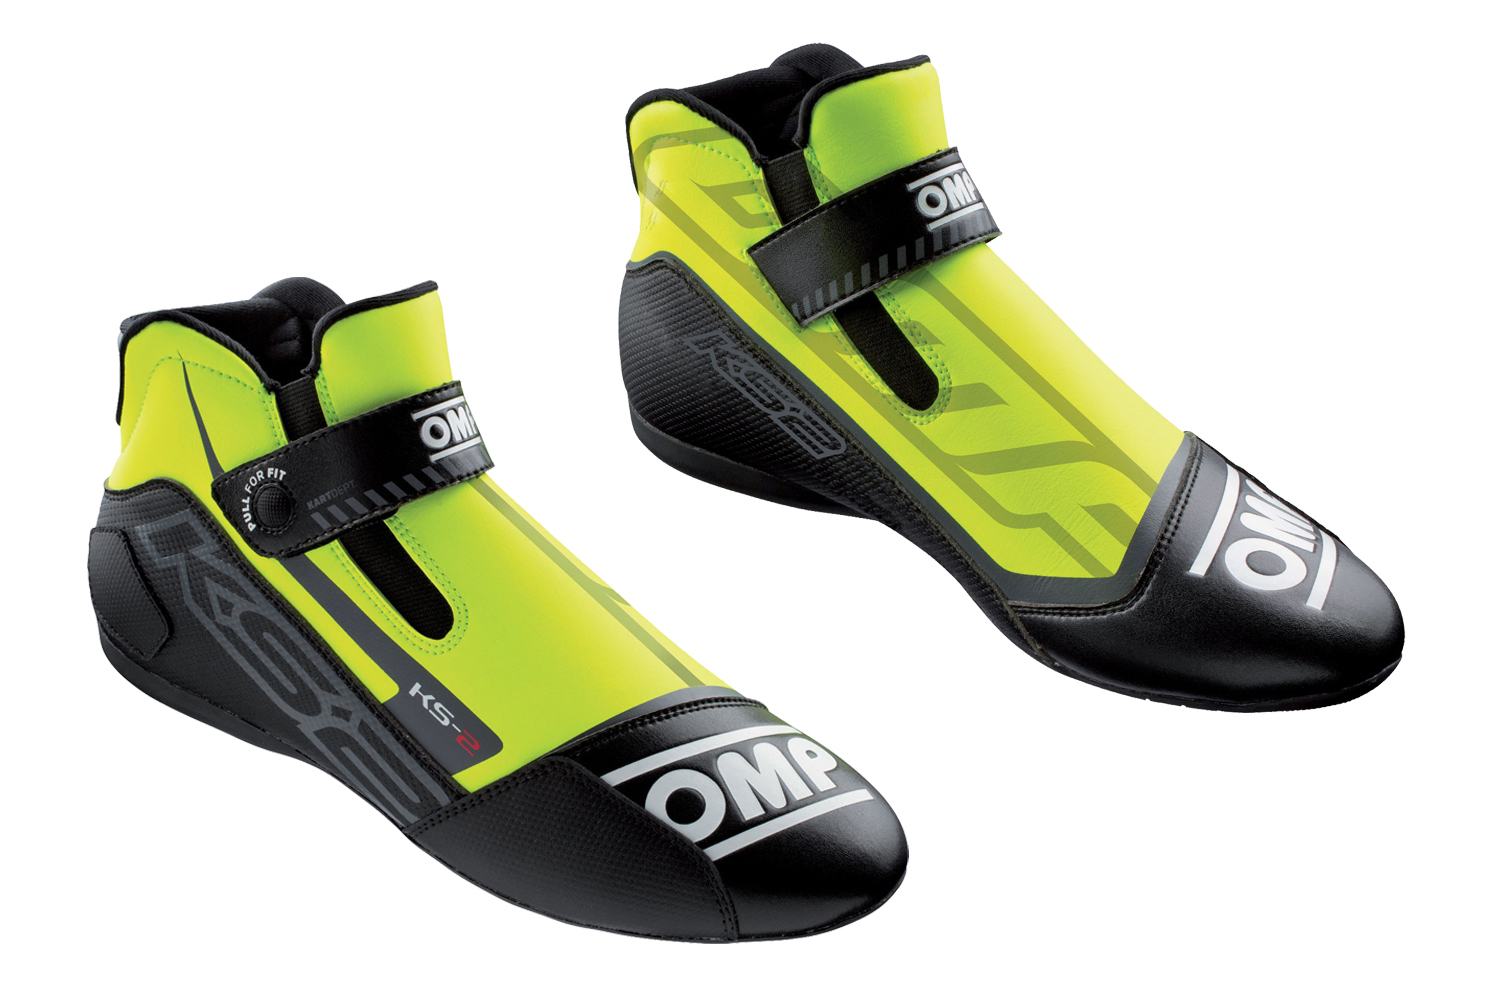 OMP Racing IC82505941 - Shoe, KS-2, Driving, Mid-Top, FIA Approved, Suede Leather Outer, Fire Retardant Fabric Inner, Fluorescent Yellow / Black, Euro Size 41, Pair